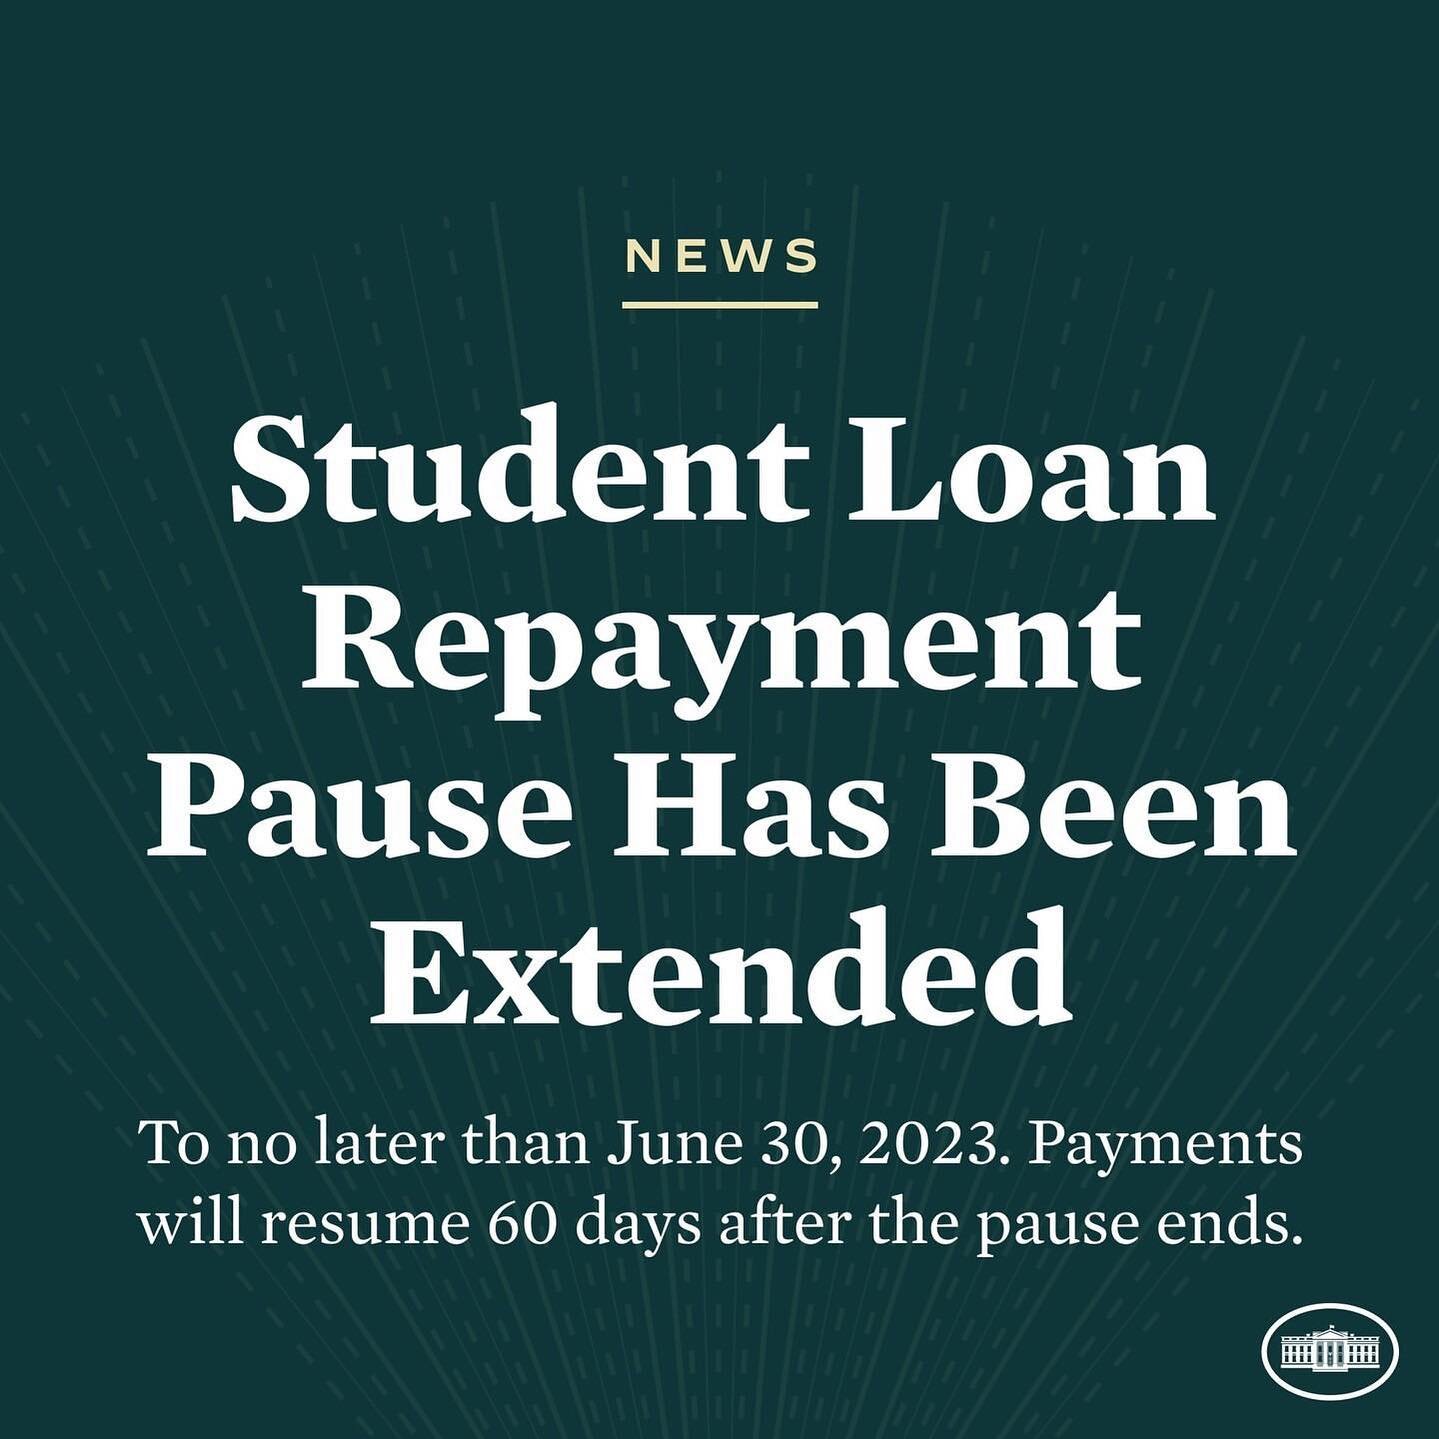 Can they be extended forever??? 😂
Via @whitehouse UPDATE: The Administration is extending the pause on federal student loan repayments to allow for the Supreme Court to rule in the case on the student debt relief program.

The pause will end no late